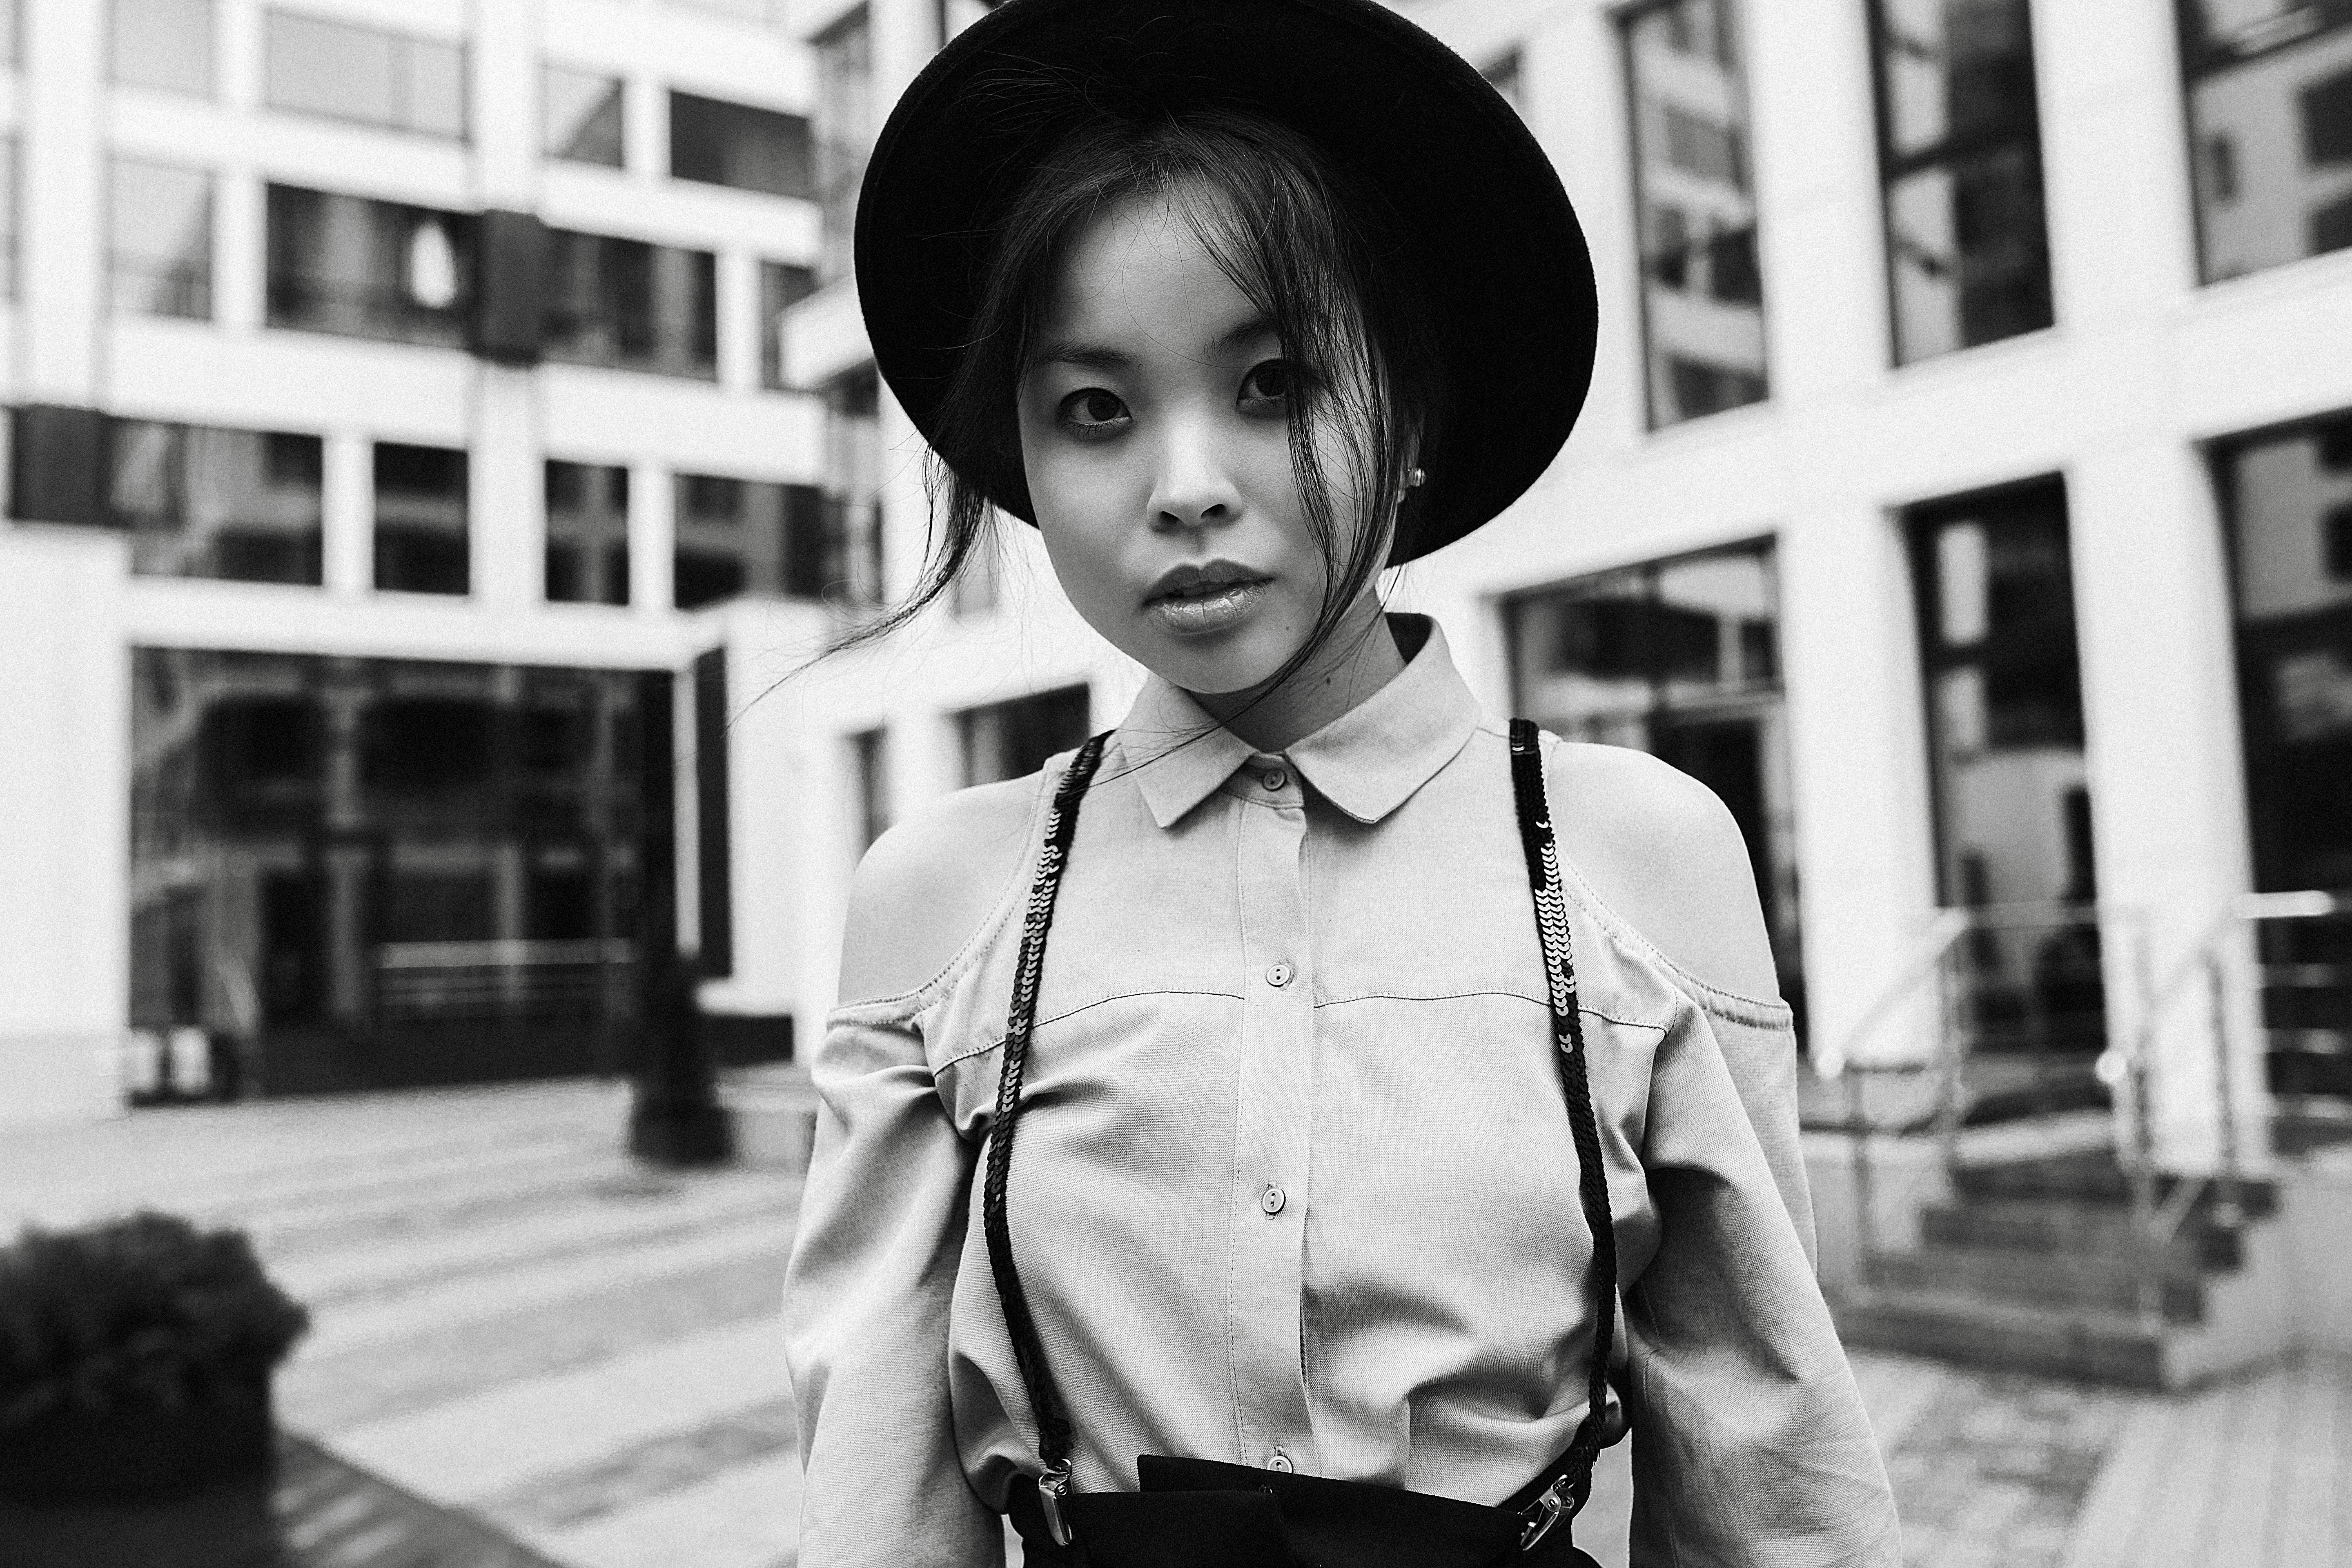 Personal photoshoot with asian girl in the city of London